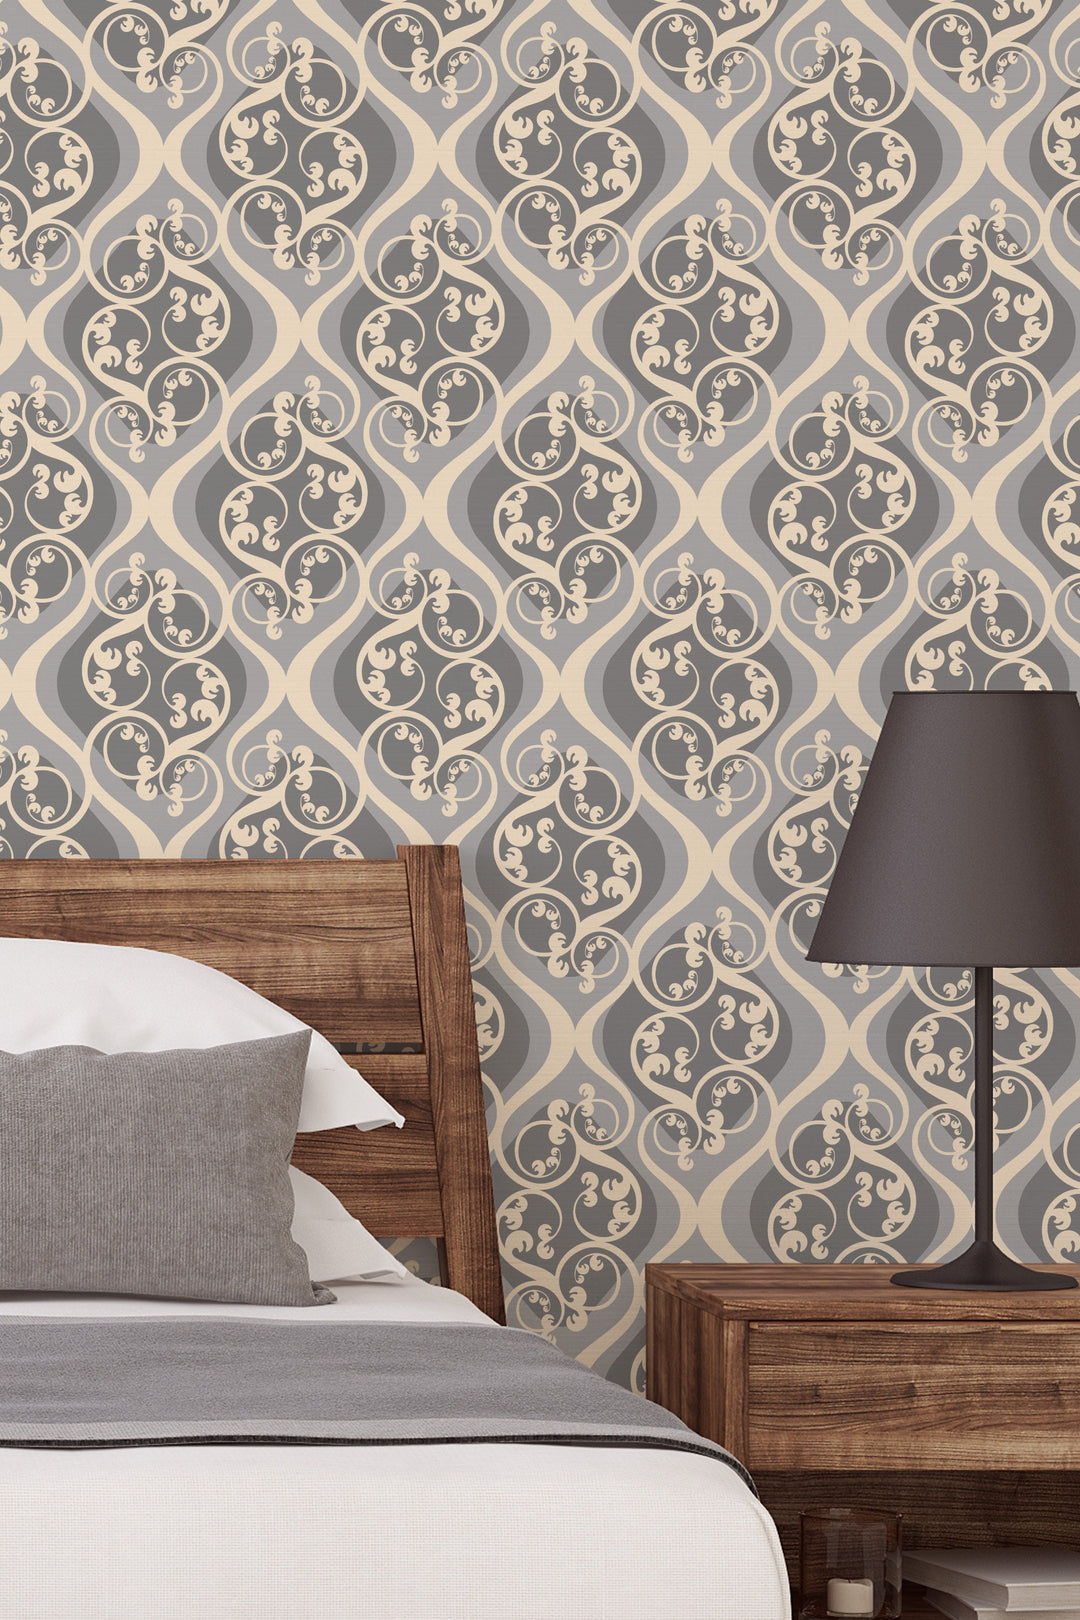 Wallpaper, Damask style, wall decor- Peel and stick wallpaper, Removable , traditional wallpaper - #53356 /1040